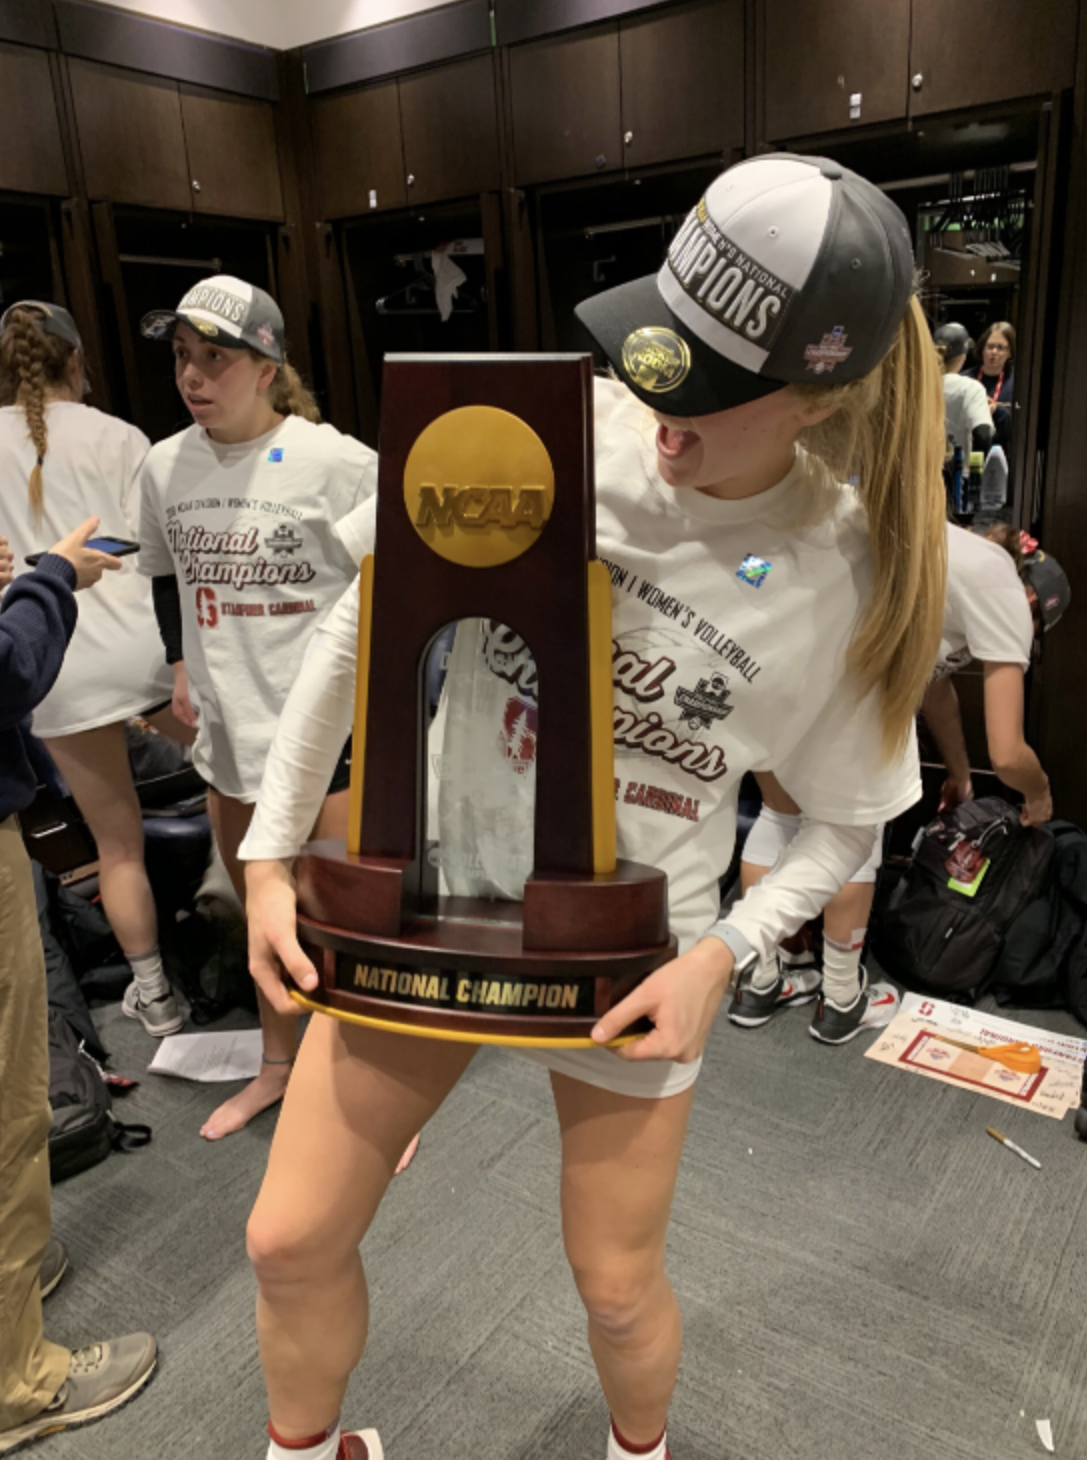 Holding the trophy after winning the indoor national championship in 2019.